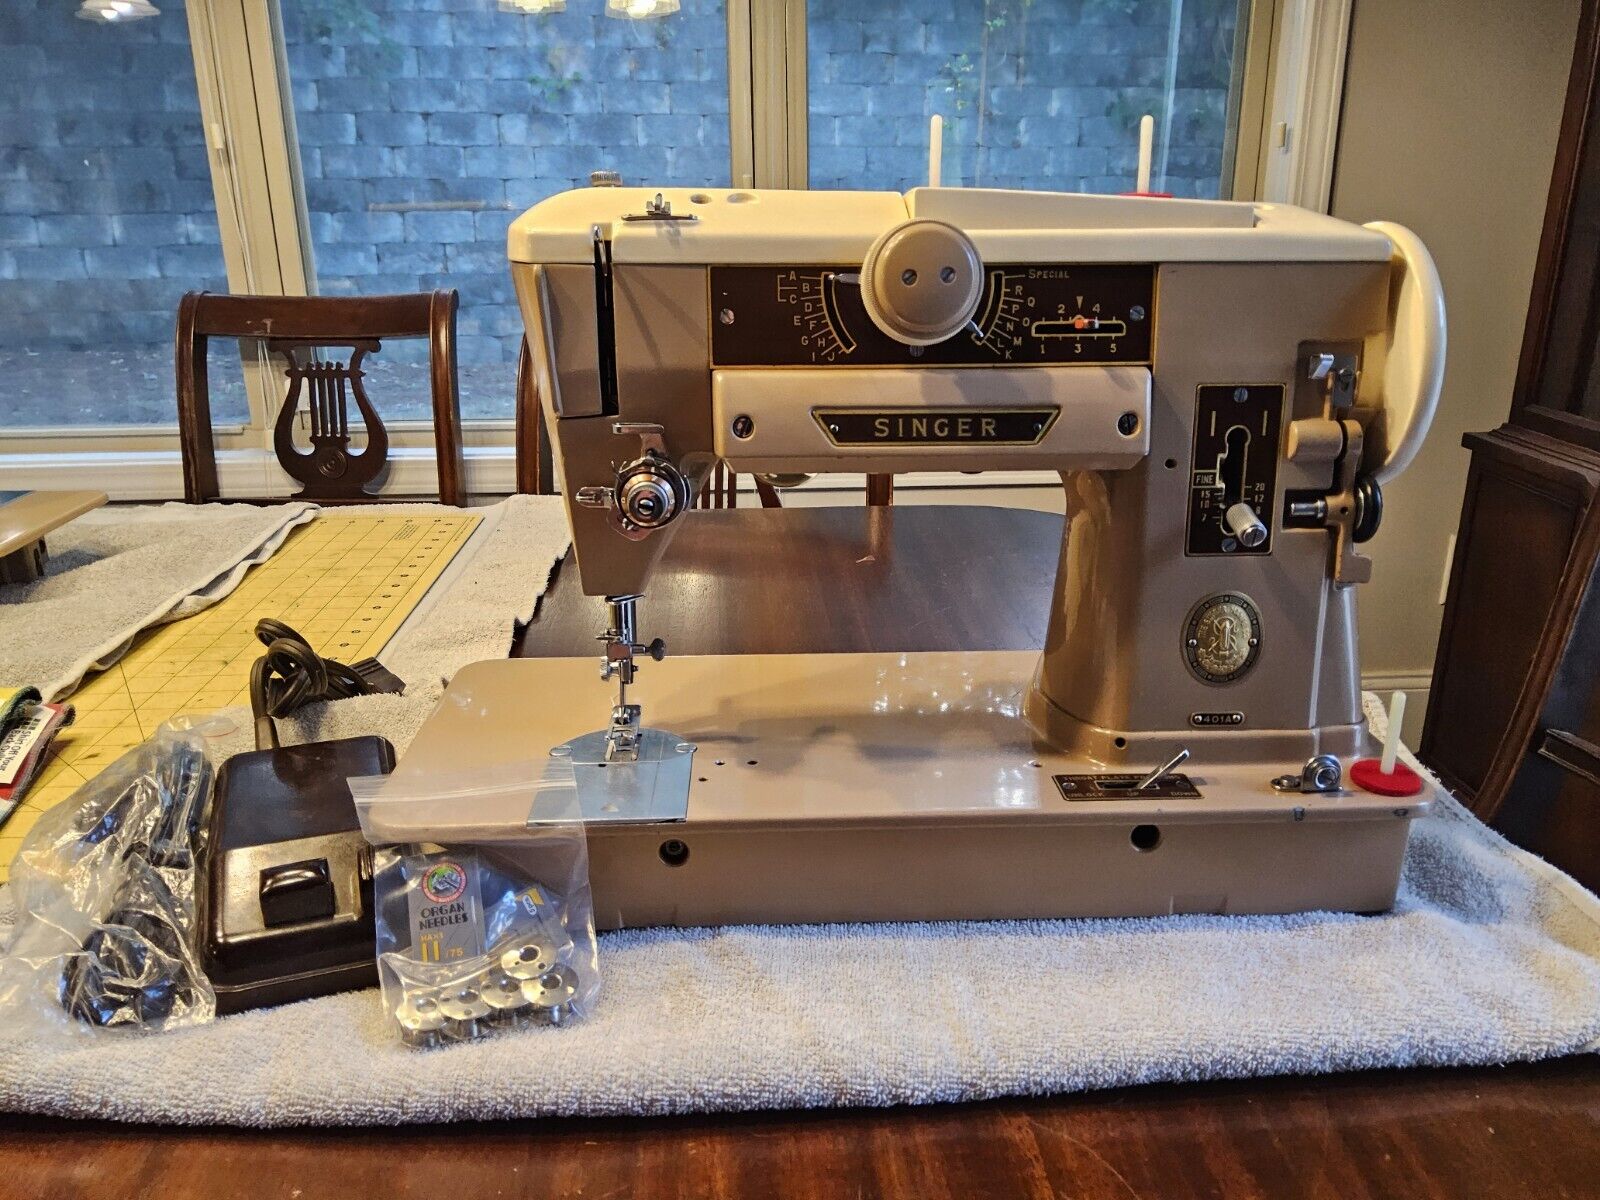 Singer 401a sewing machine cleaned and serviced Good cond SN NA546005